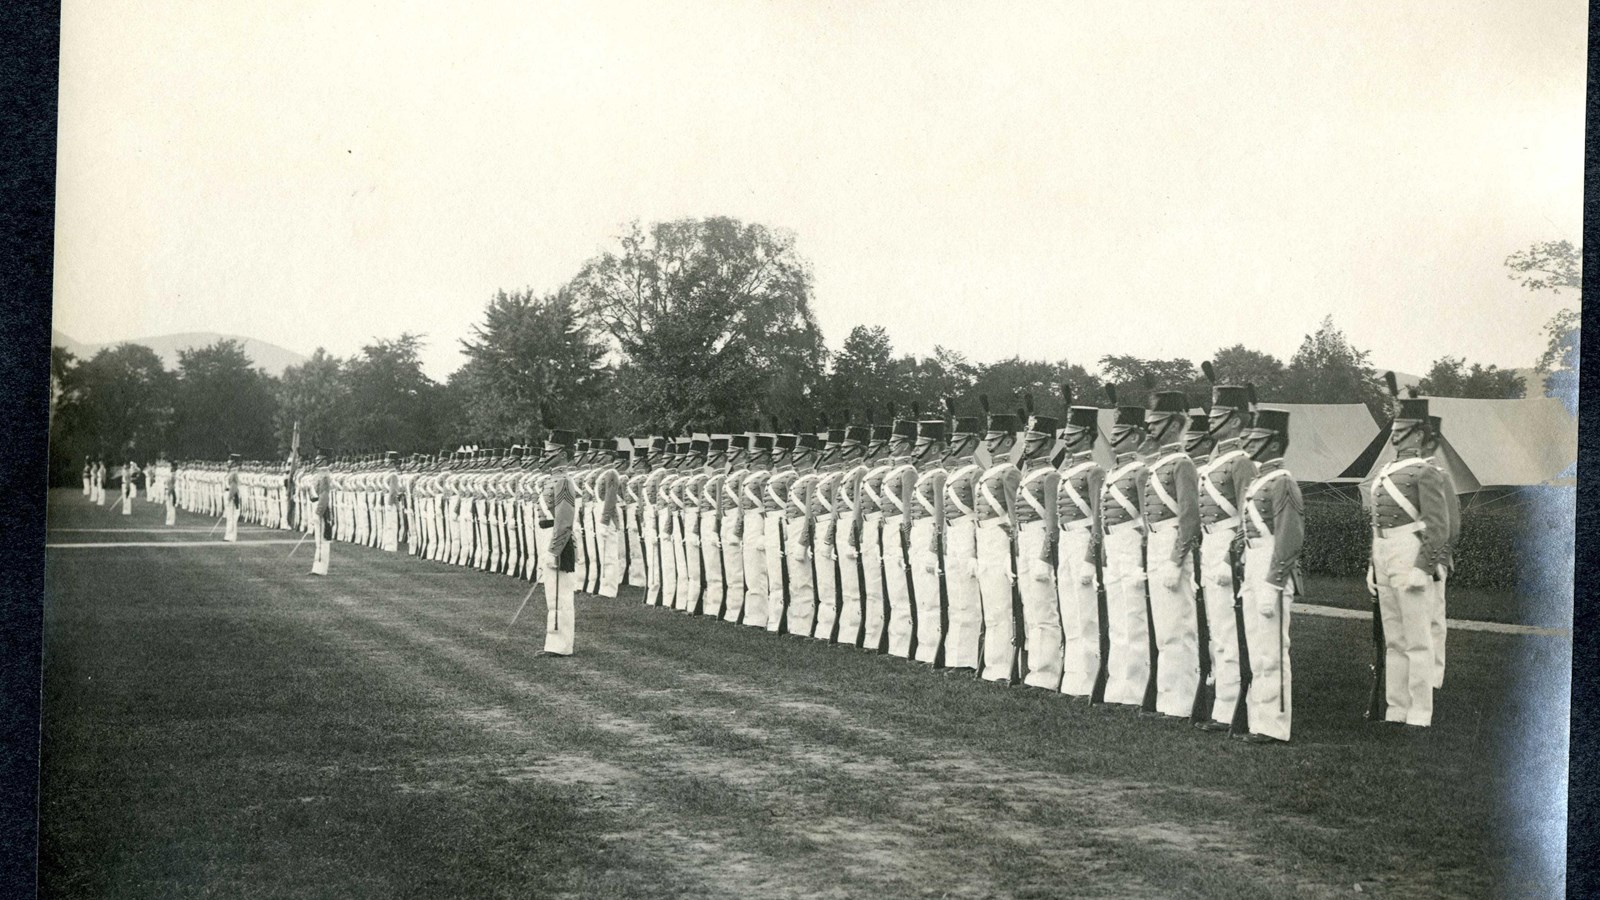 Black and white of soldiers in same uniform standing in straight line on flat grassy area